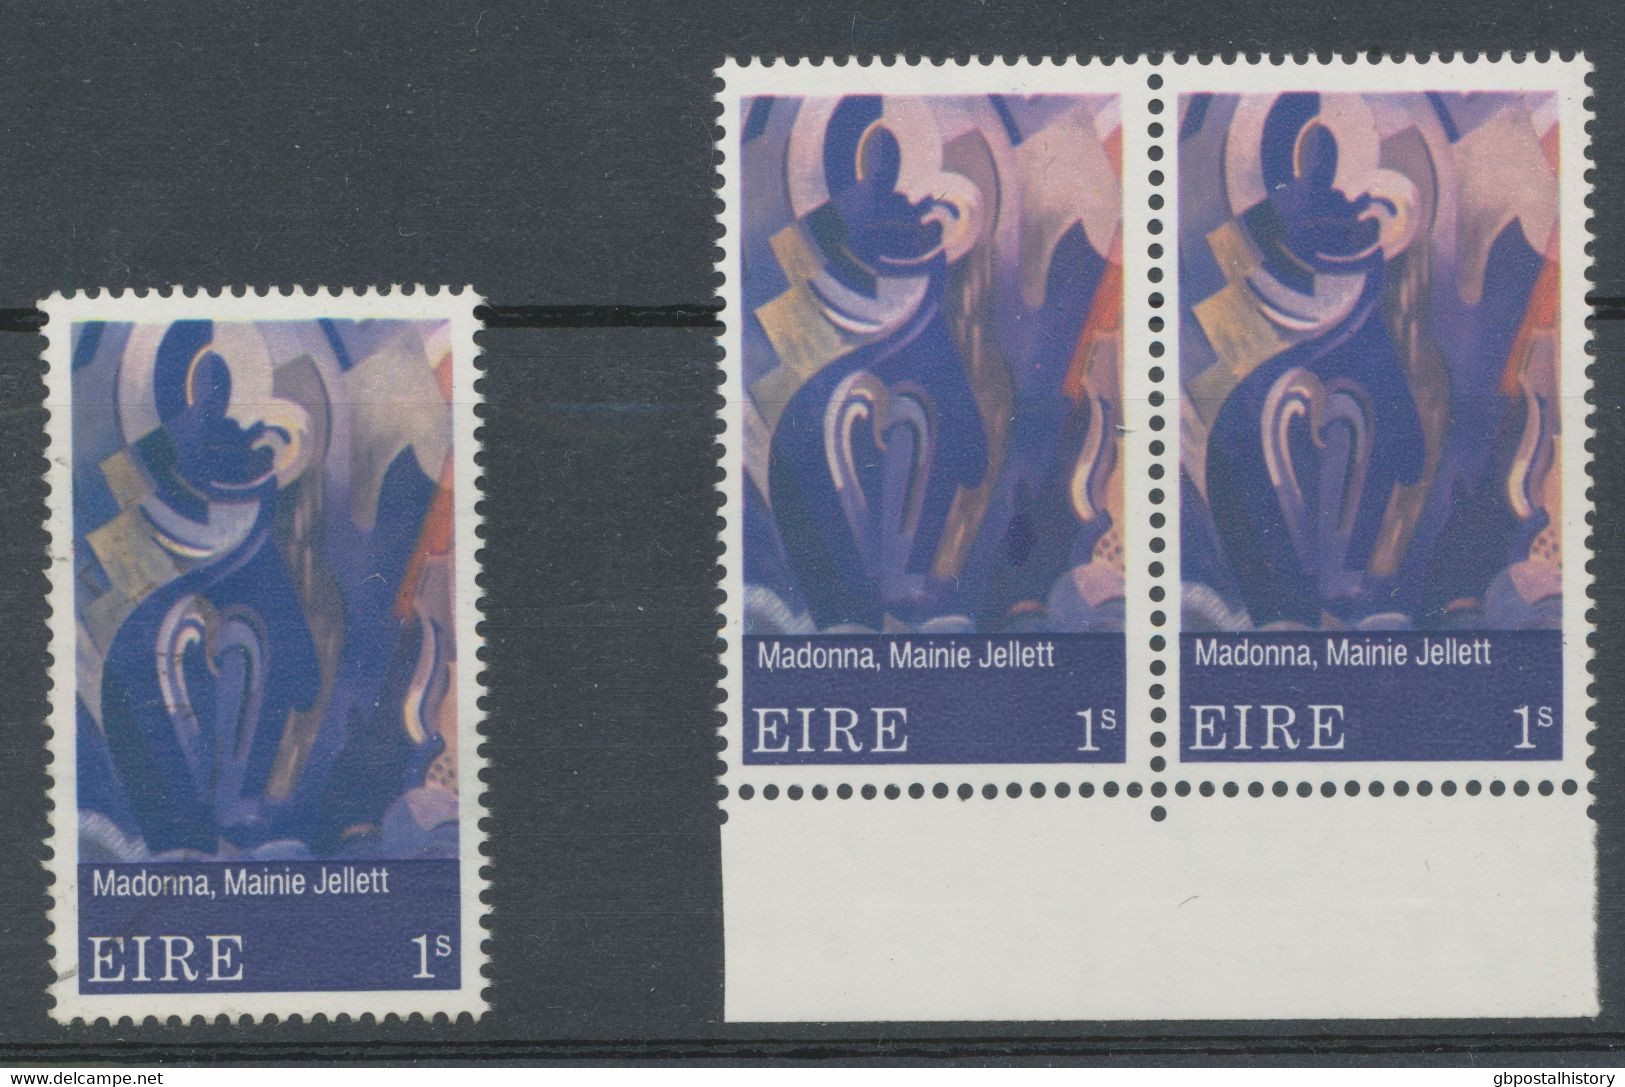 IRELAND 1970 Contemporary Irish Art 1S Superb Used MAJOR VARIETY COLOR PINK On The Left Stamp Is Almost Complete MISSING - Oblitérés